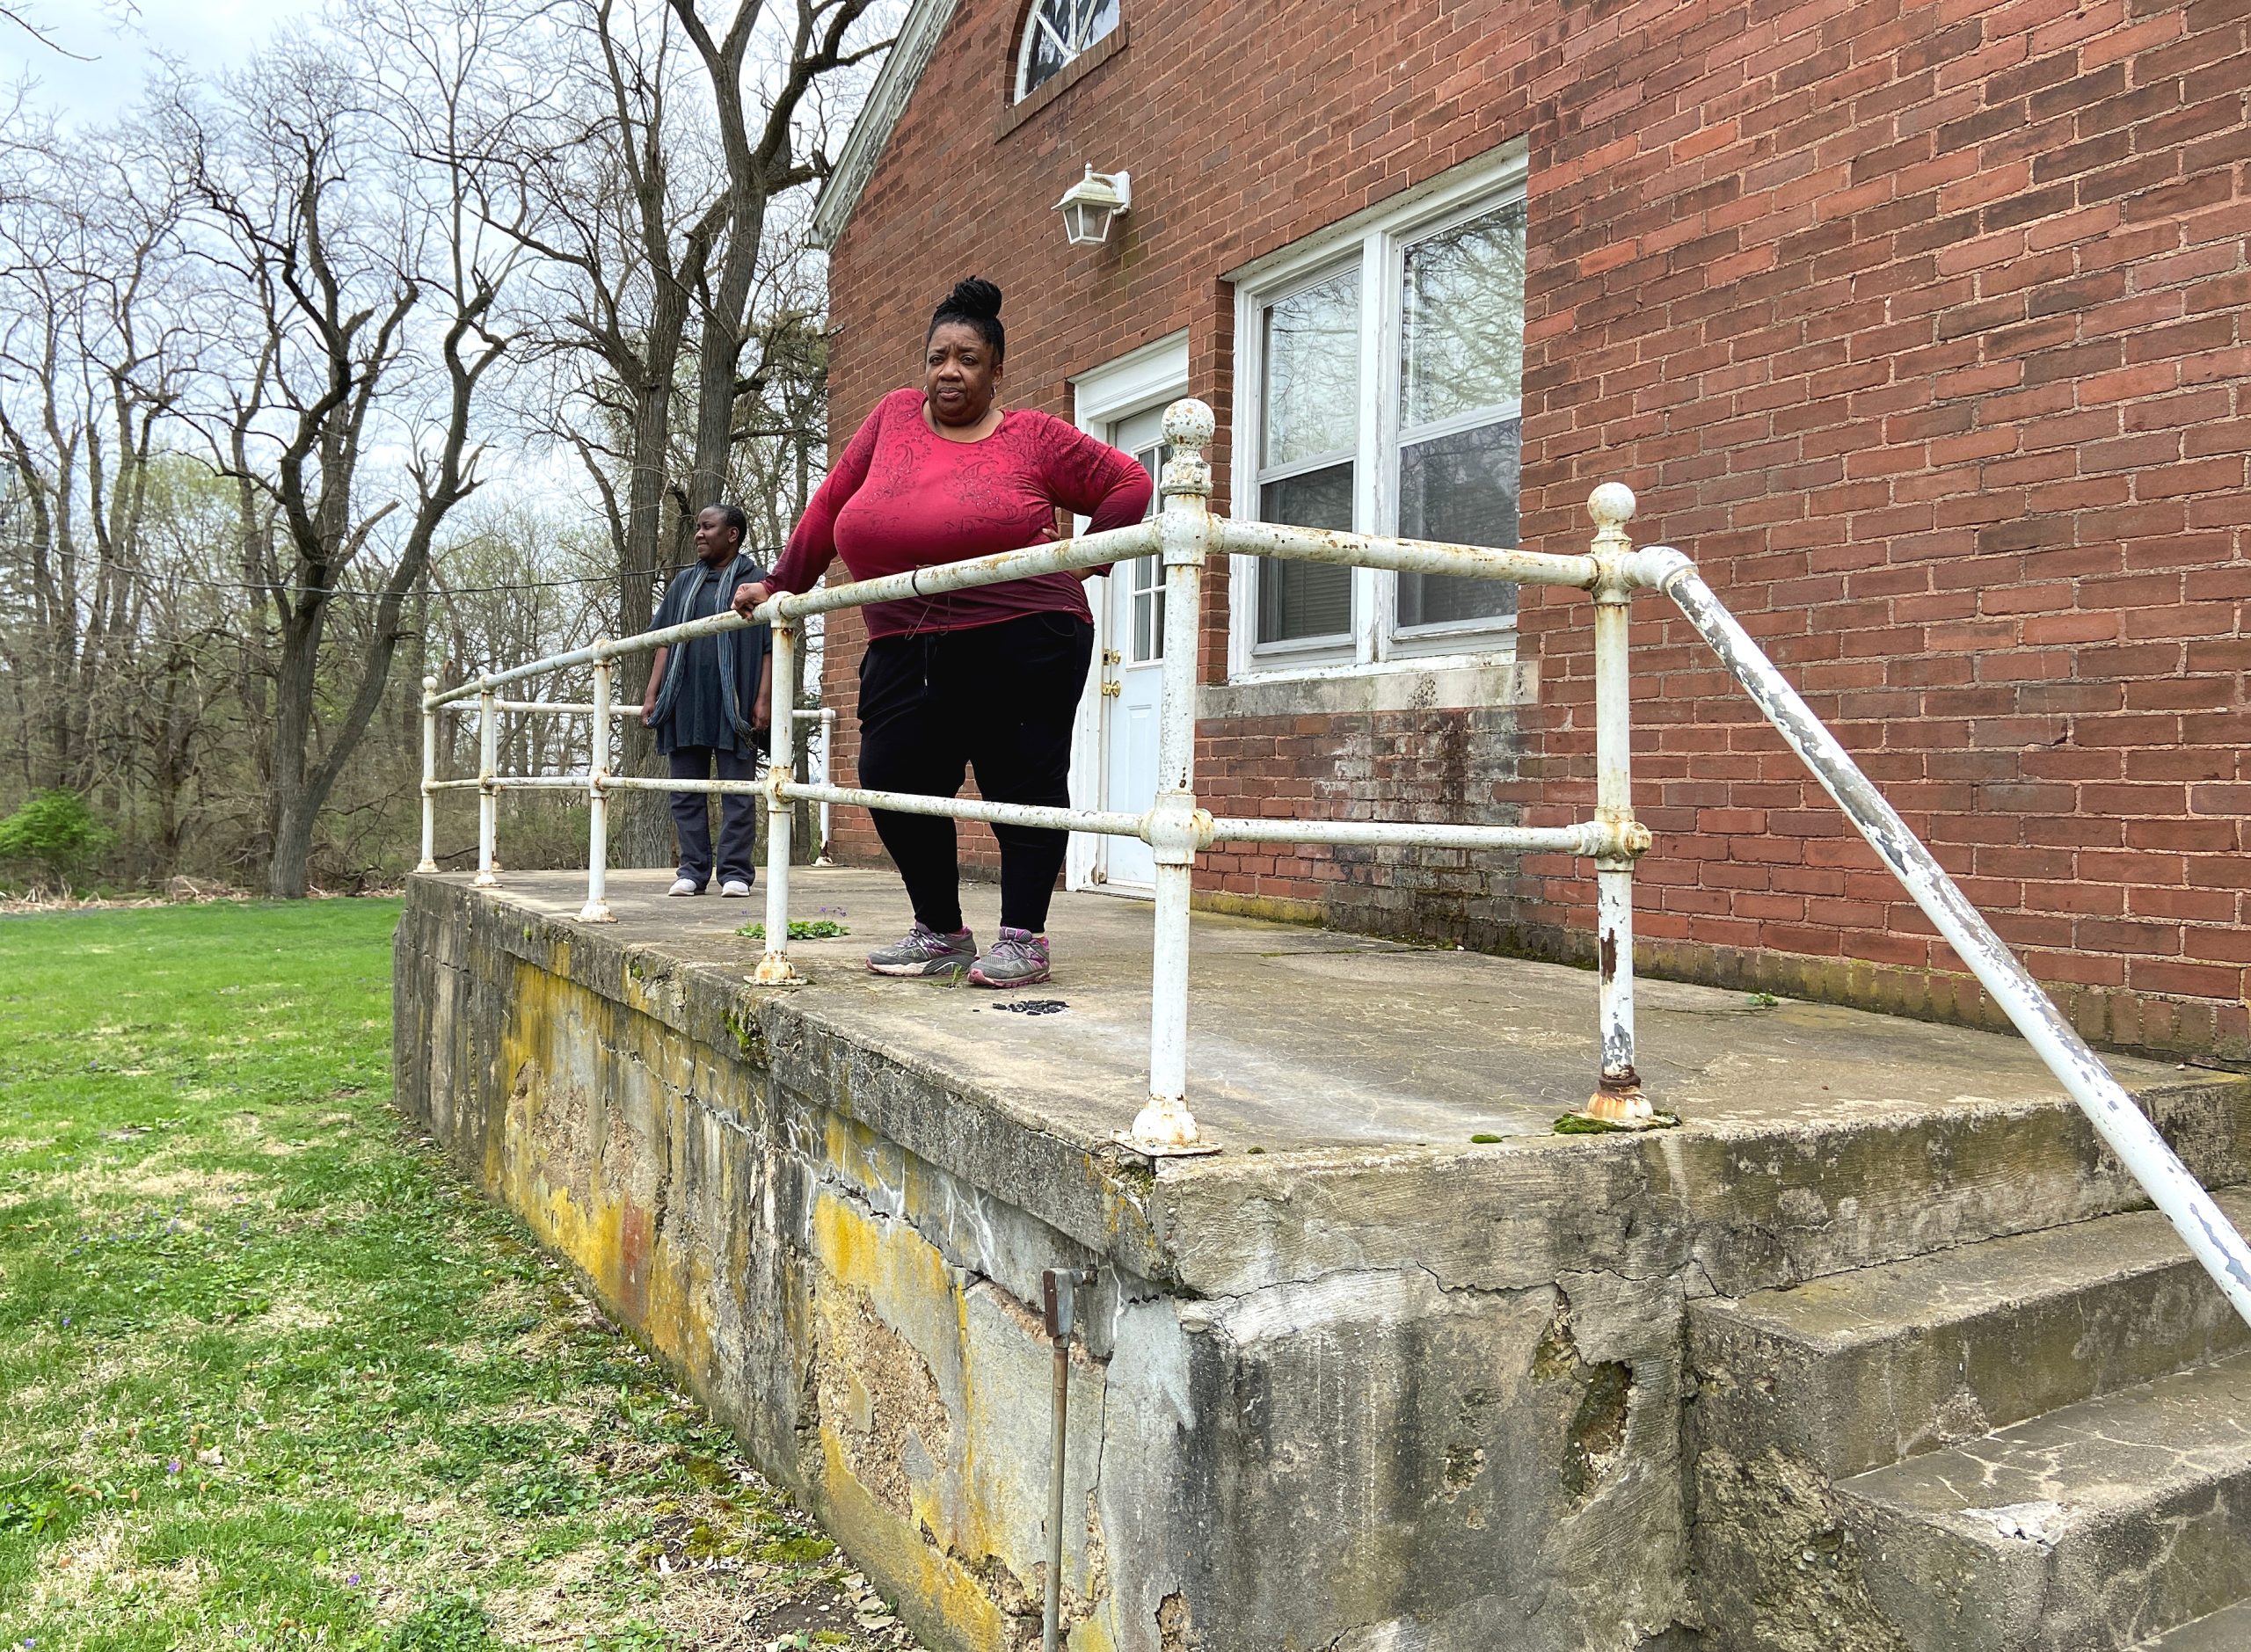 Image: Latrelle Bright (left) and Nicole Anderson-Cobb (right) stand on the concrete back patio of the Allerton Park house they occupied during their residency. Bright is Black woman who is wearing a long, gray short-sleeved shirt, gray pants, and a cool-colored striped scarf. She has closely cropped, short hair. She looks off into the distance. Anderson-Cobb is a Black woman who is wearing a red long sleeved shirt, black pants, and a warm colored scarf. Her hair is tied in a top knot on her head. The house is brick with a painted white door and trim. Photo by Jessica Hammie.